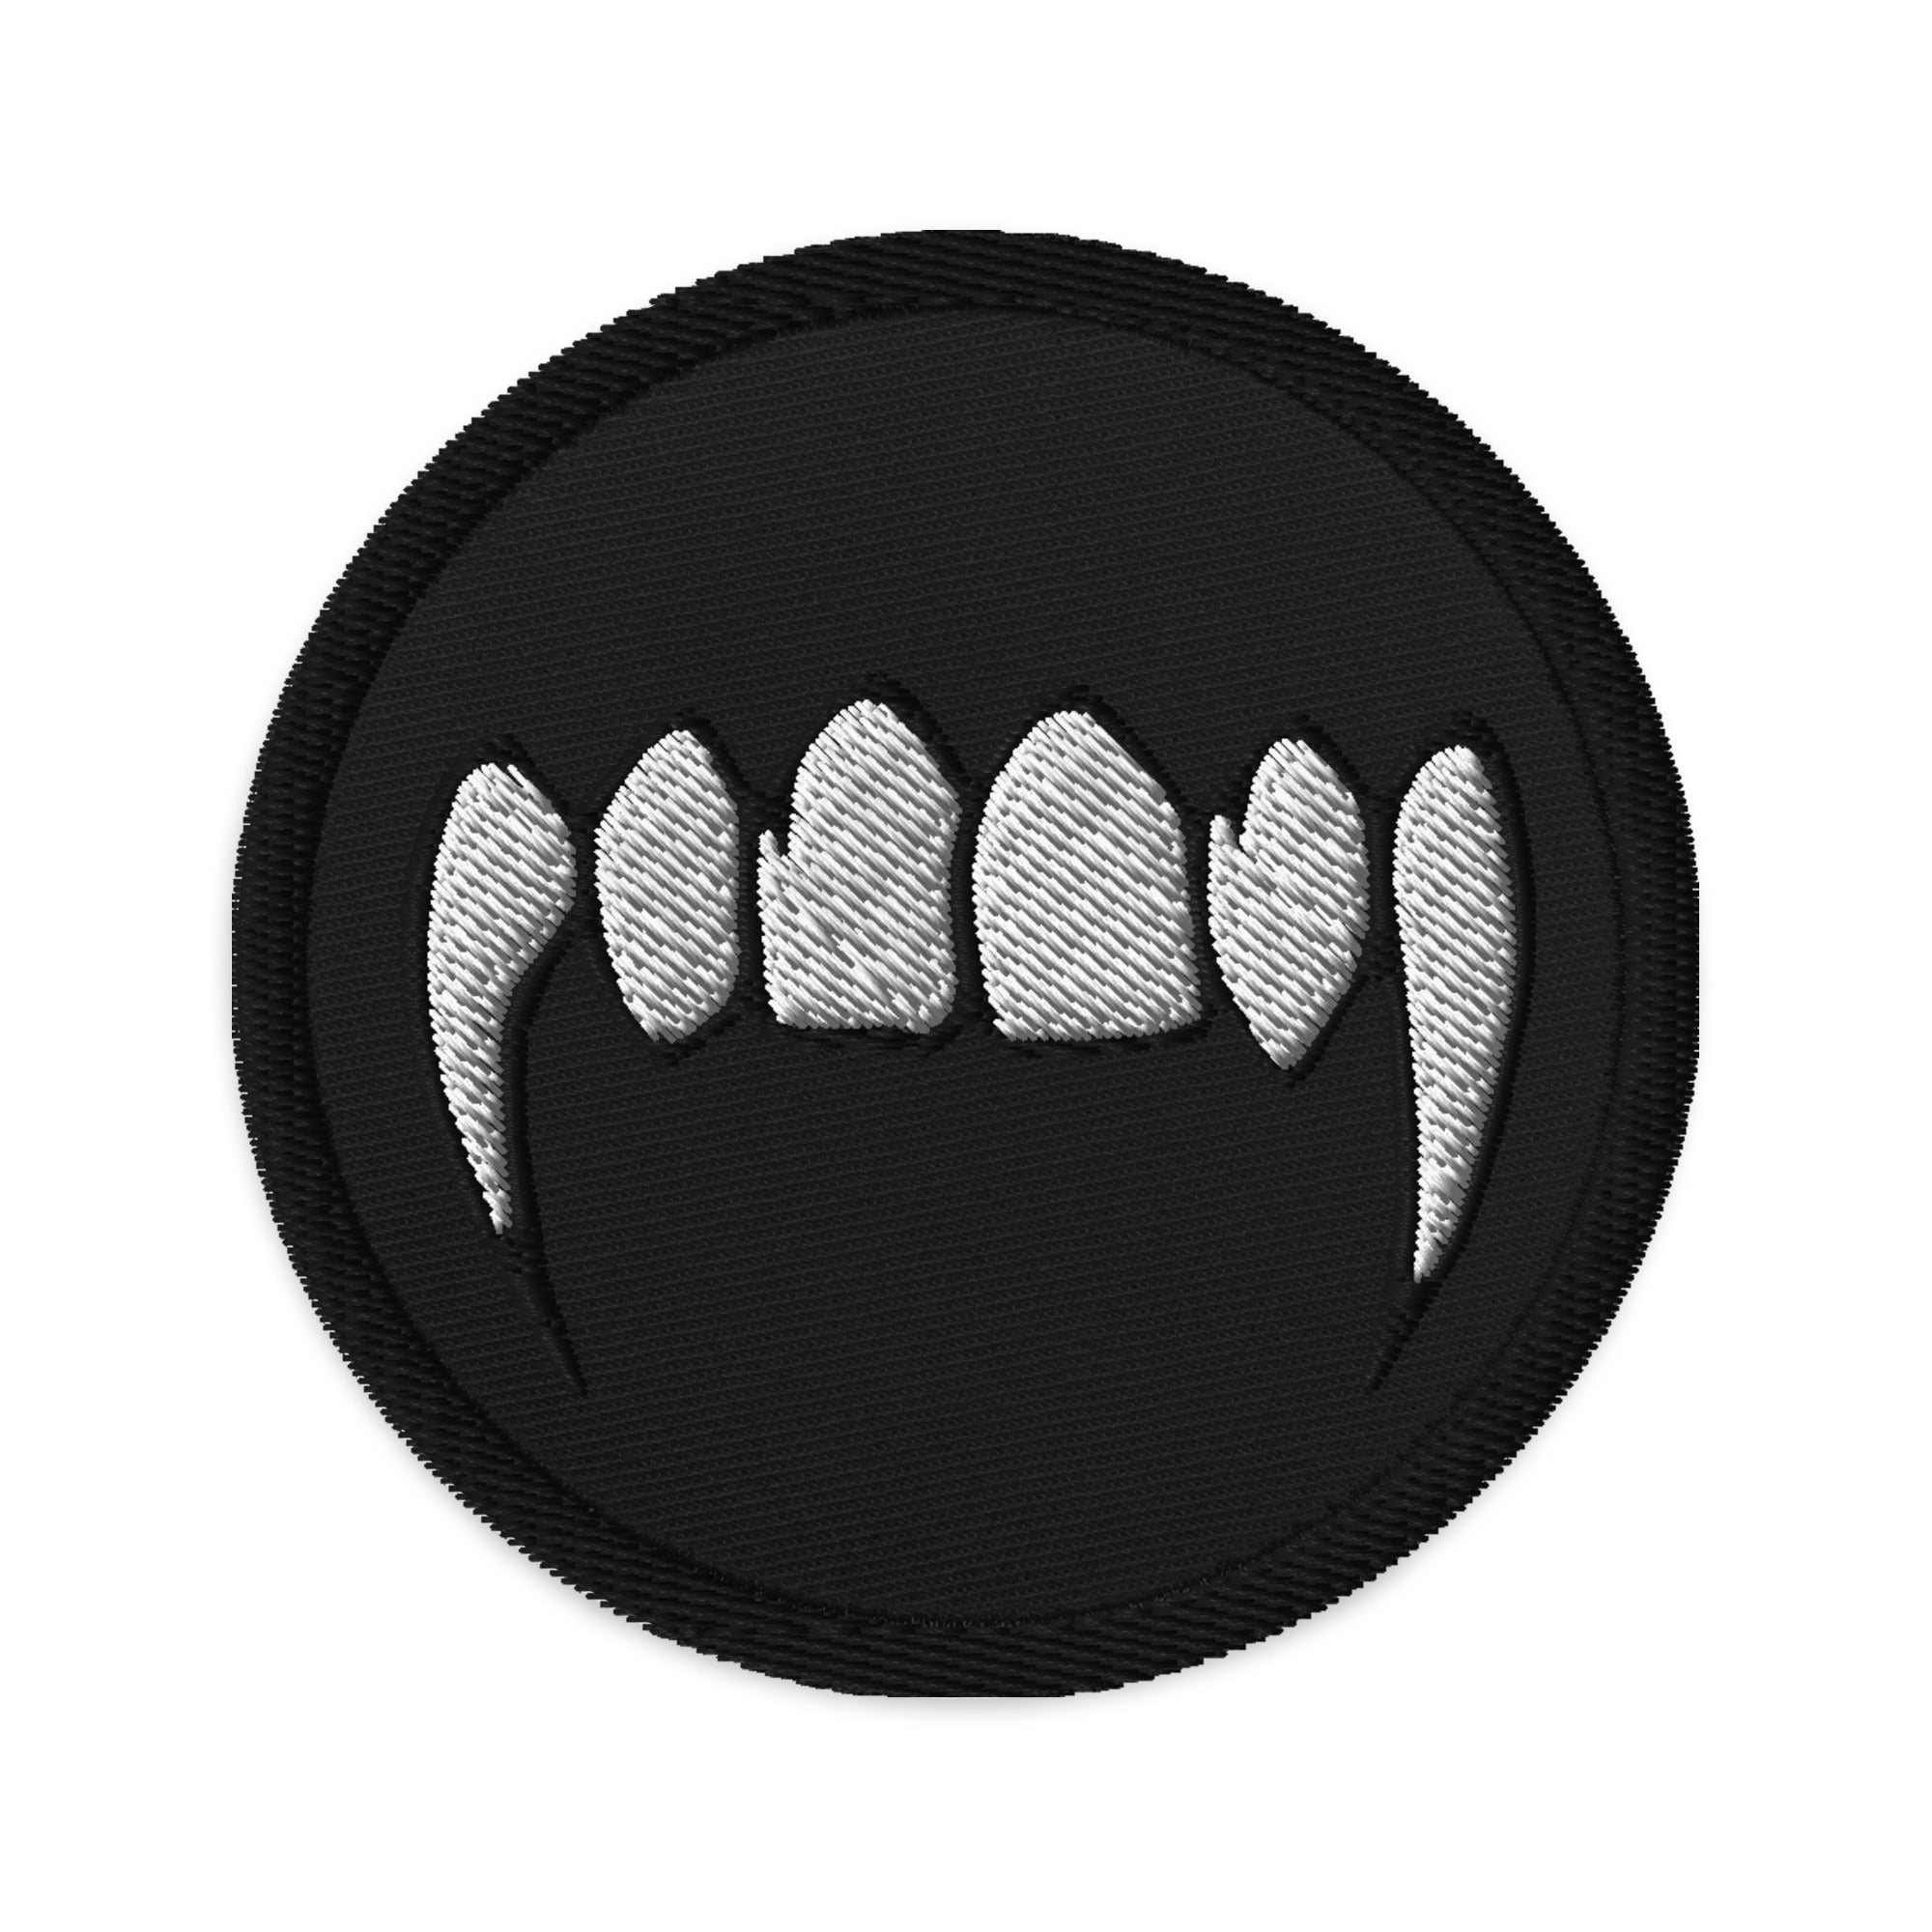 Vampire Fangs Embroidered Patch Bram Stoker's Dracula Teeth - Edge of Life Designs